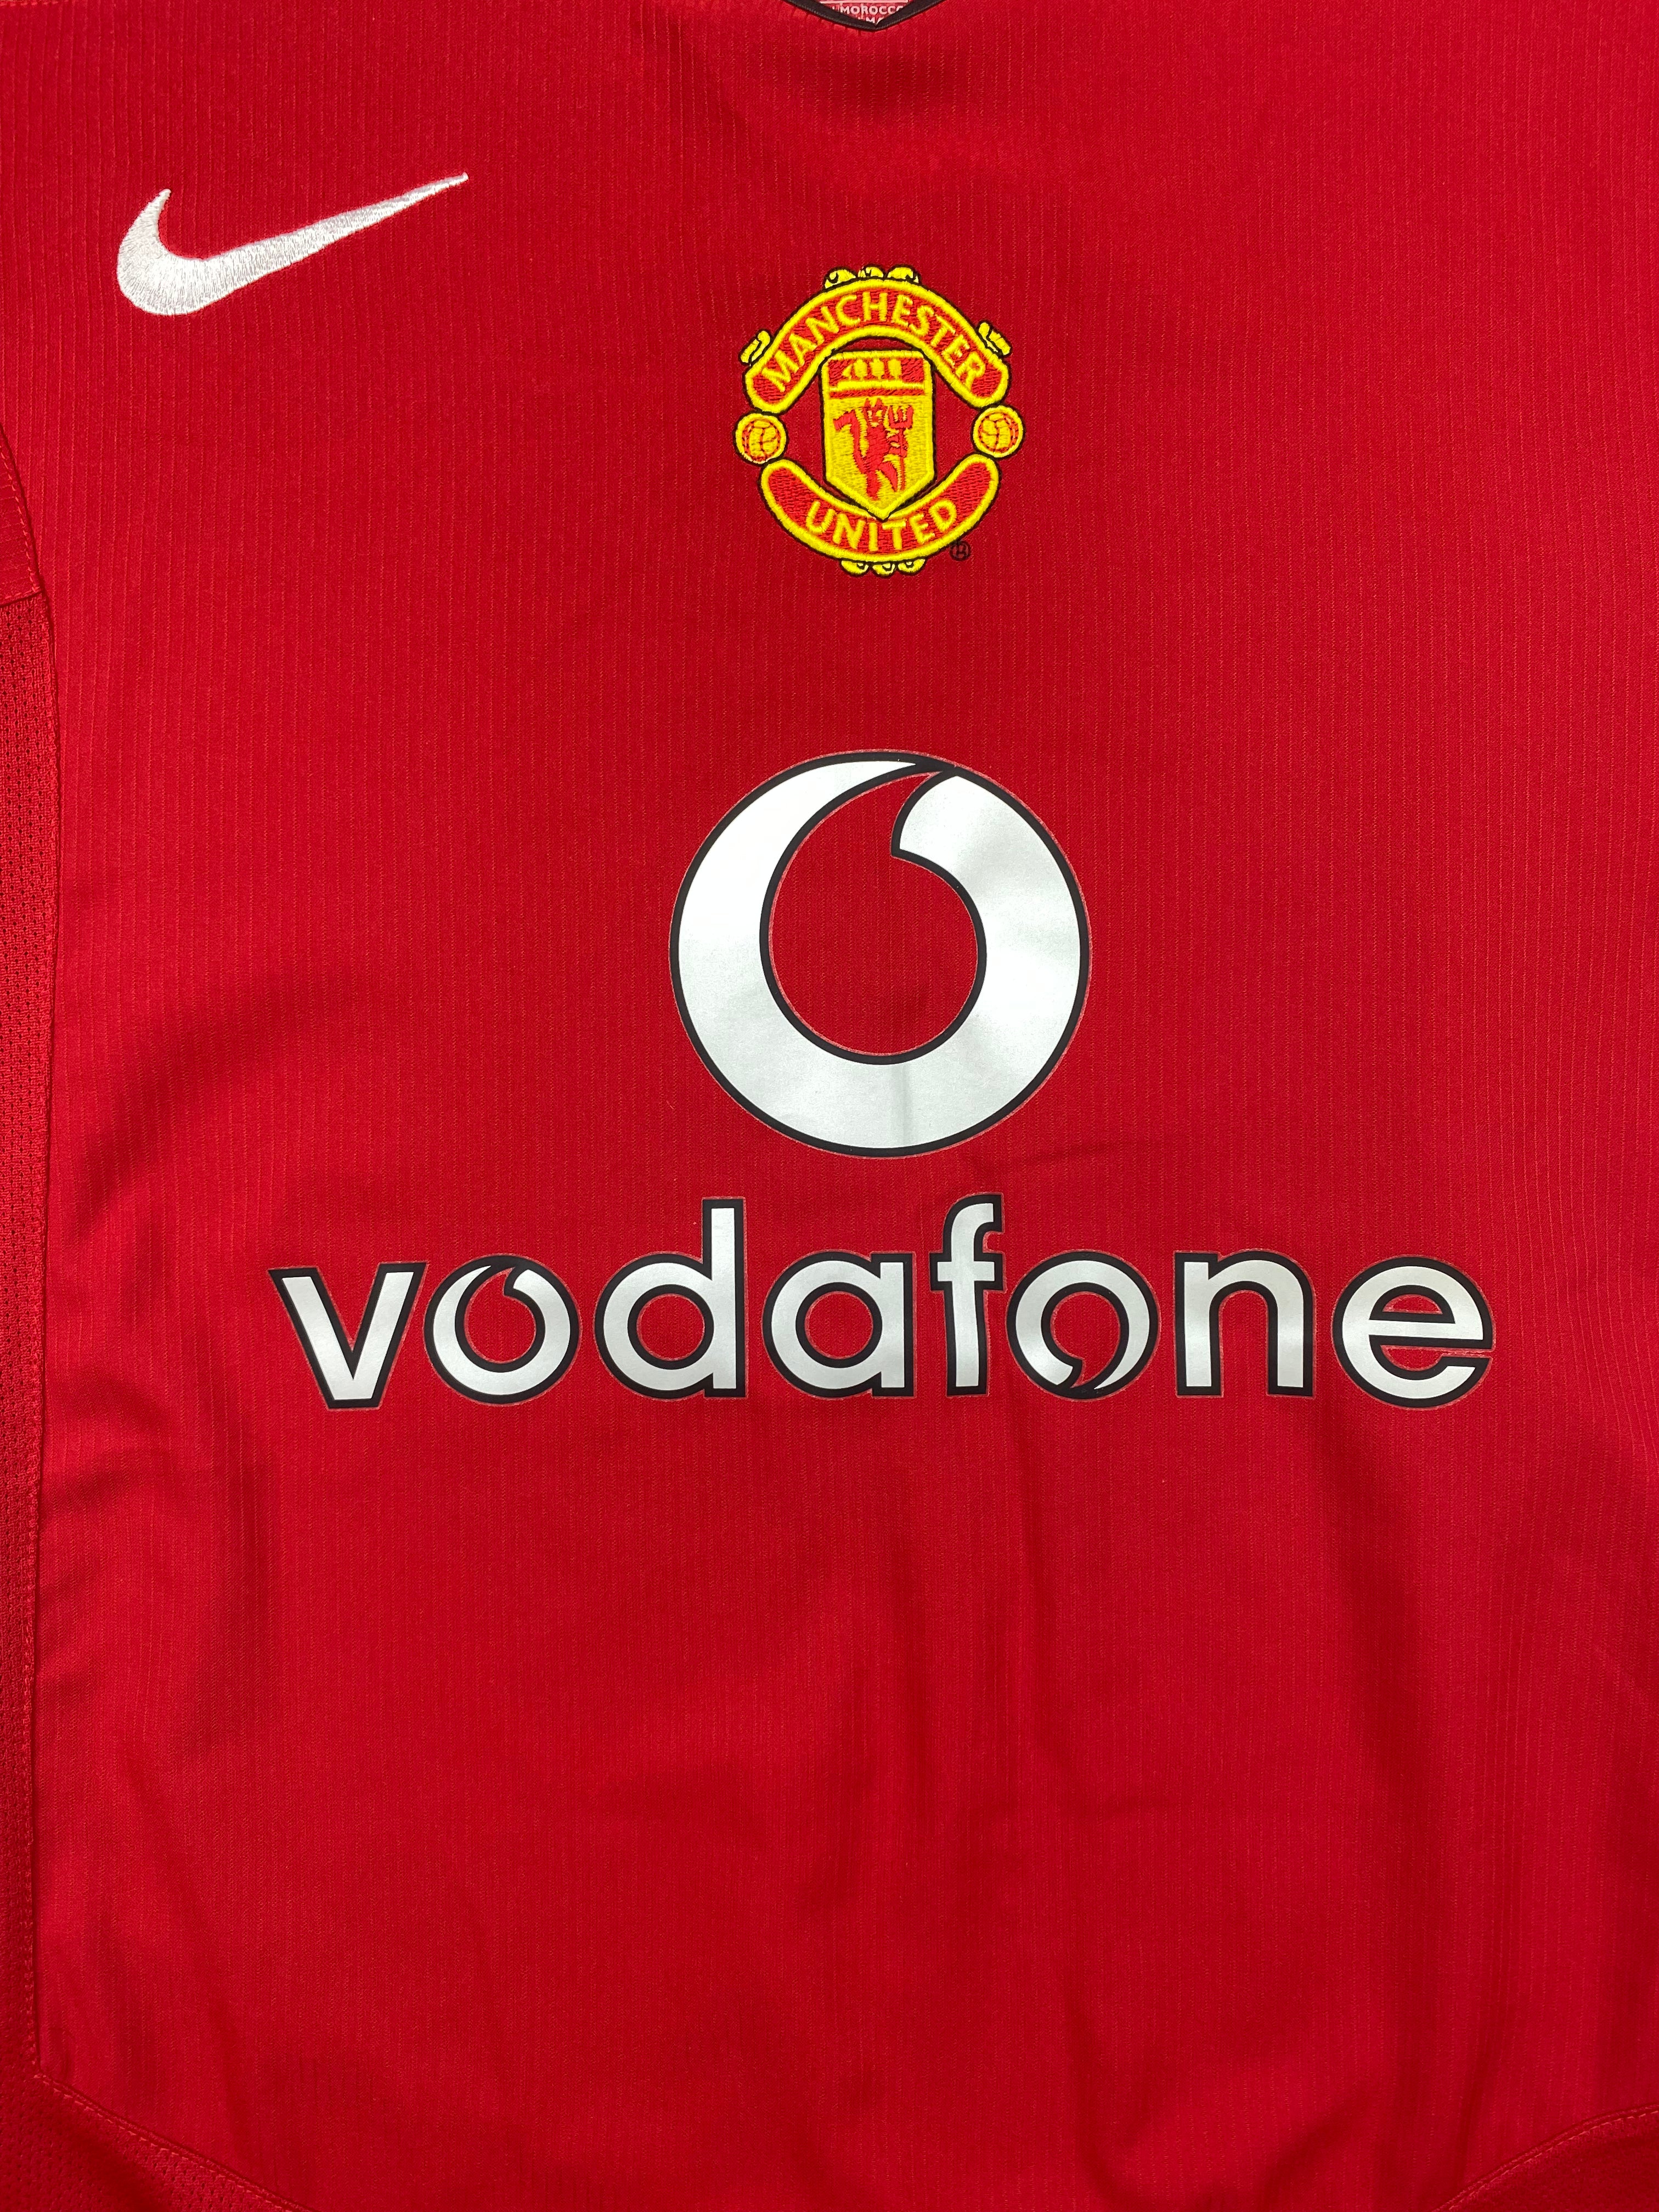 2004/06 Manchester United Home Shirt (L) 9.5/10